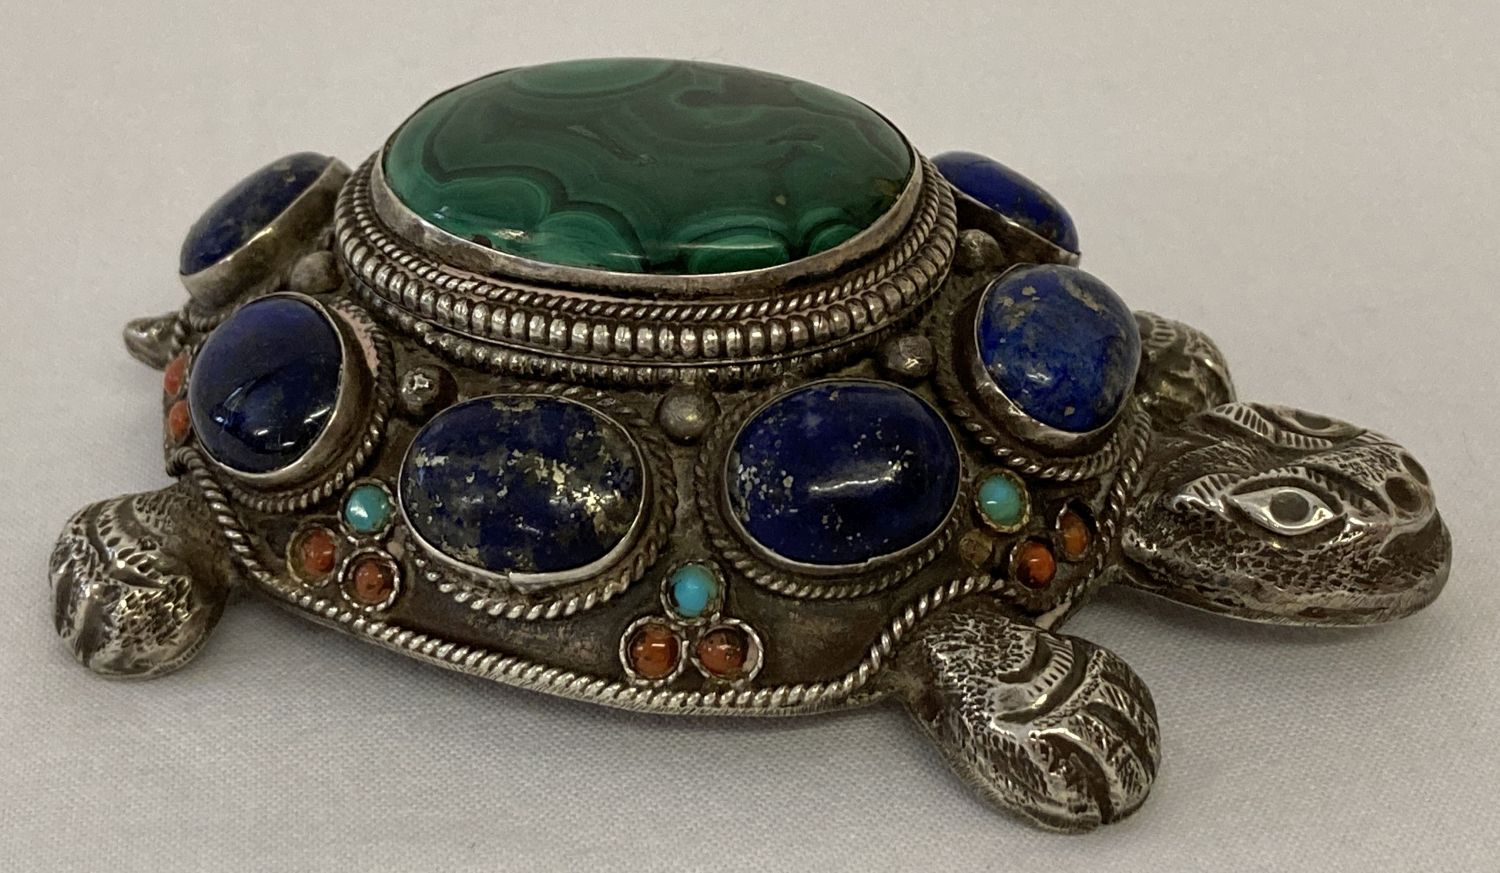 A decorative silver stone set trinket/pill box in the shape of a tortoise.